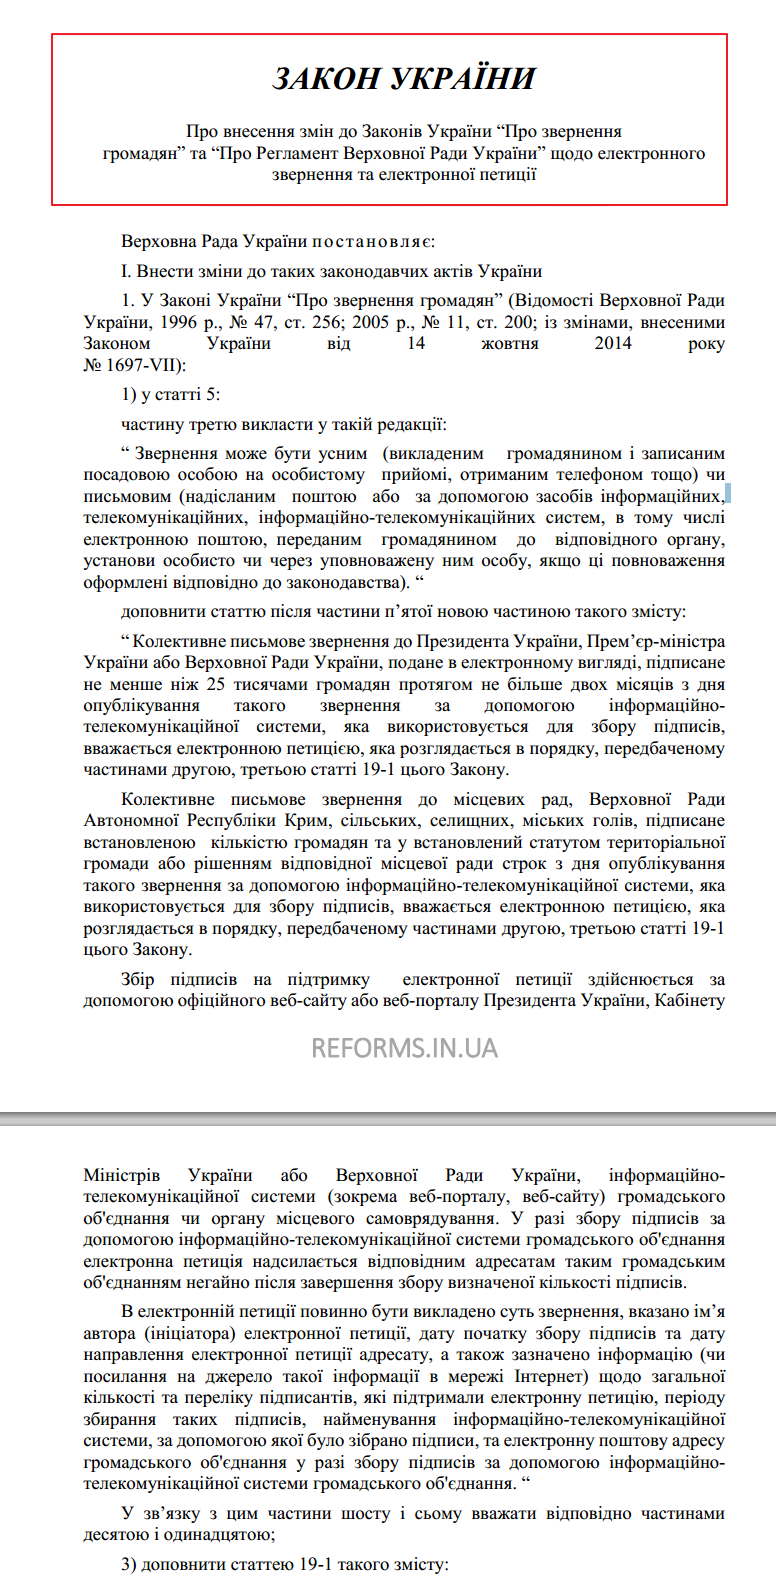 http://www.reforms.in.ua/Content/download/OR035E_E-petitions.pdf